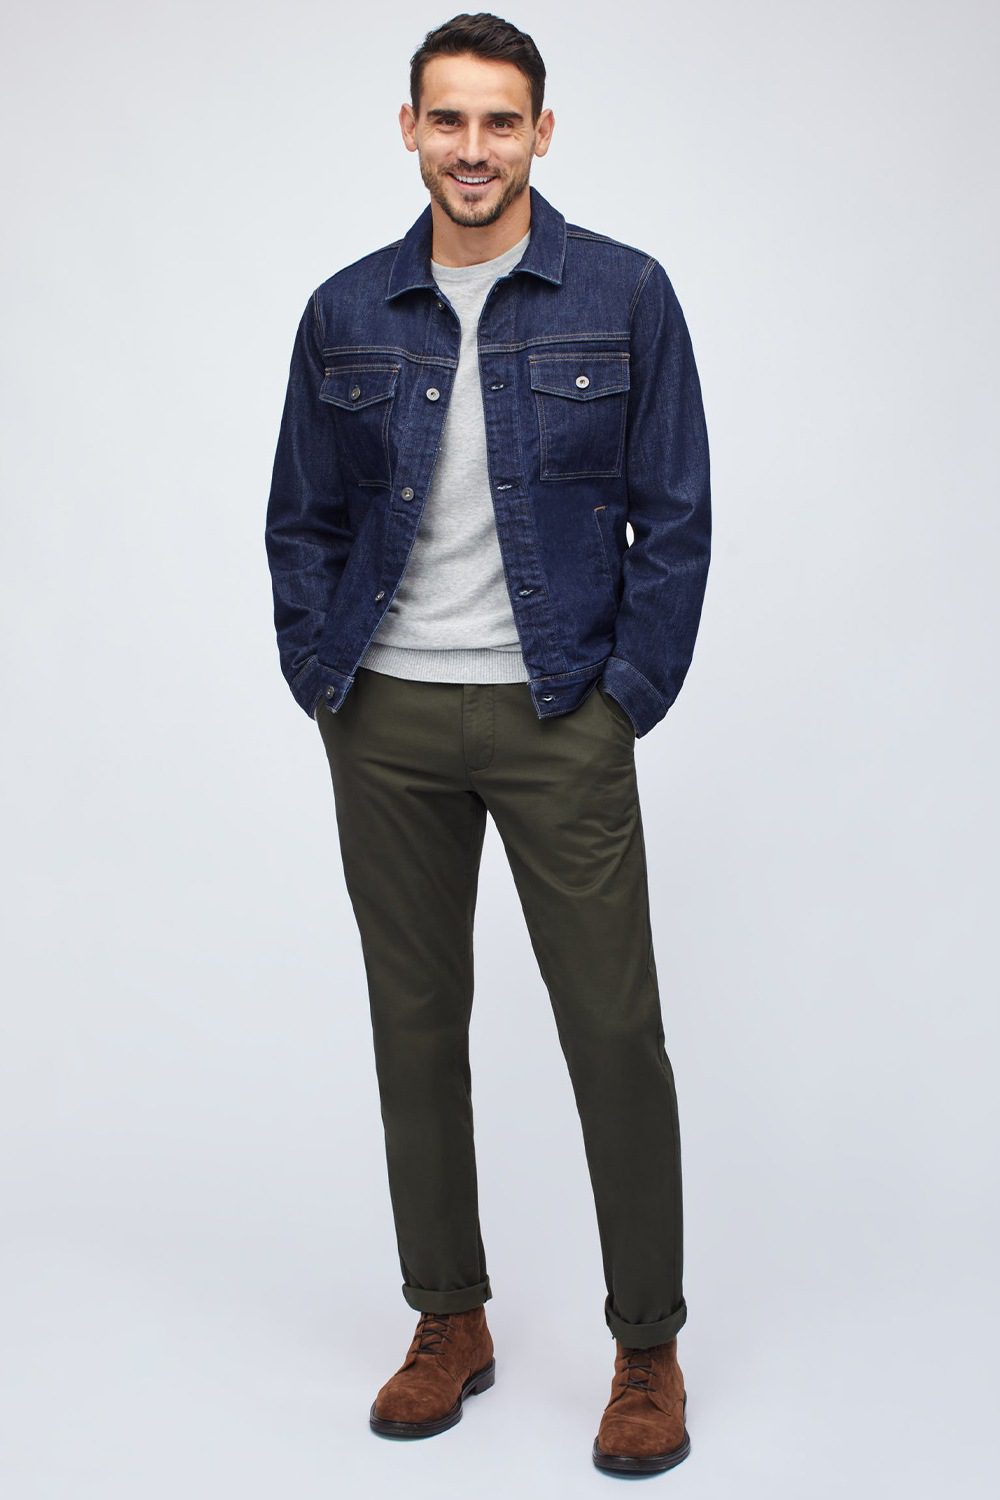 Denim Trends For Men (And How To Them)